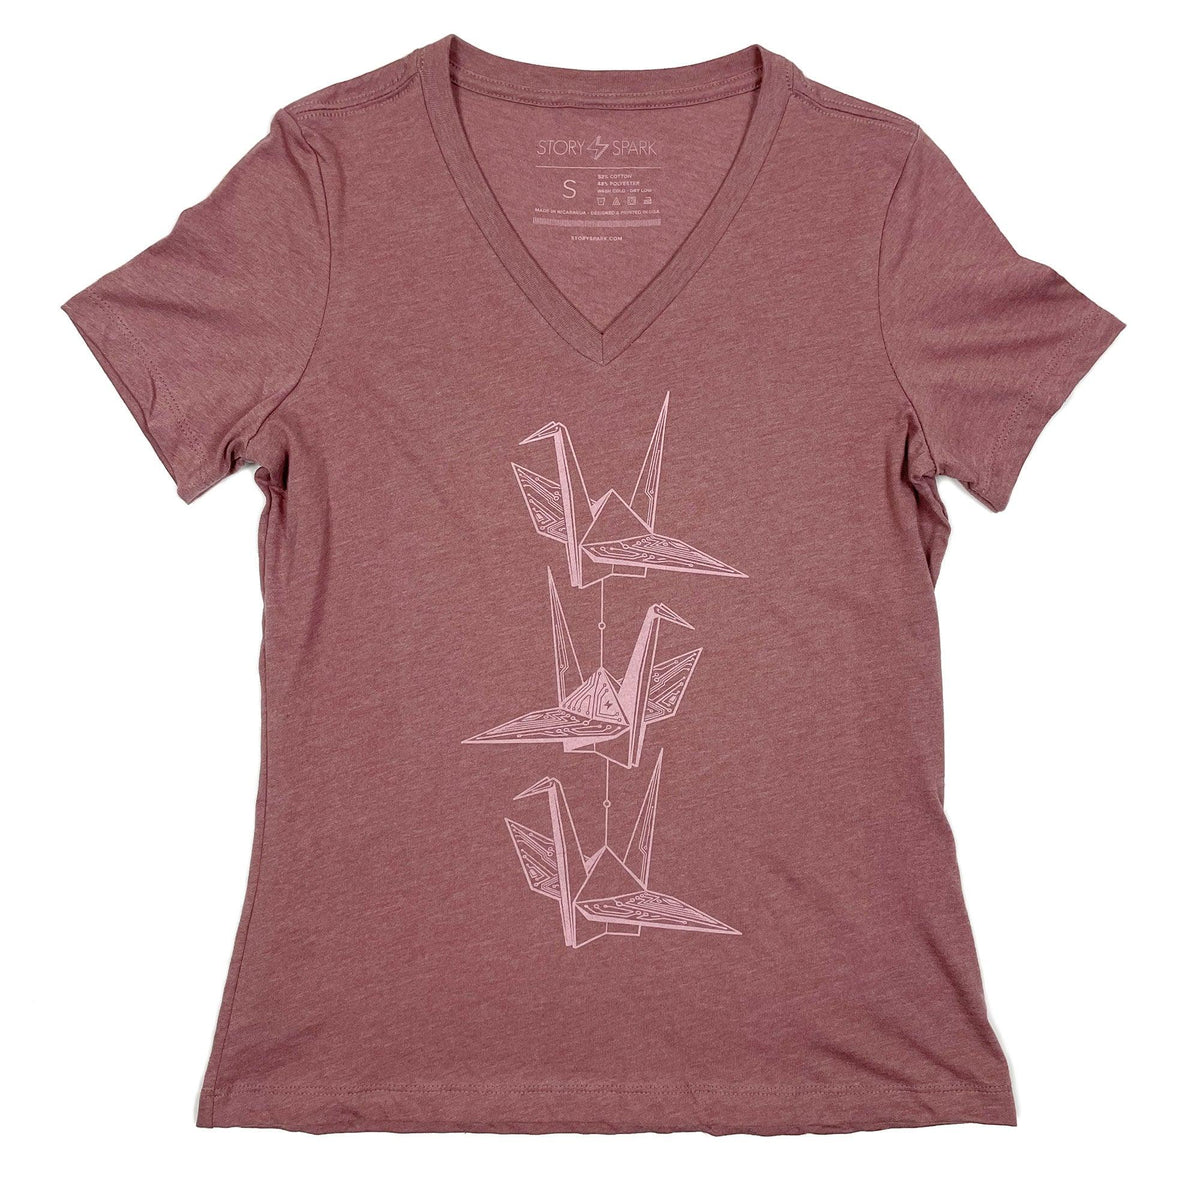 Tech-gami Womens T-shirt by STORY SPARK